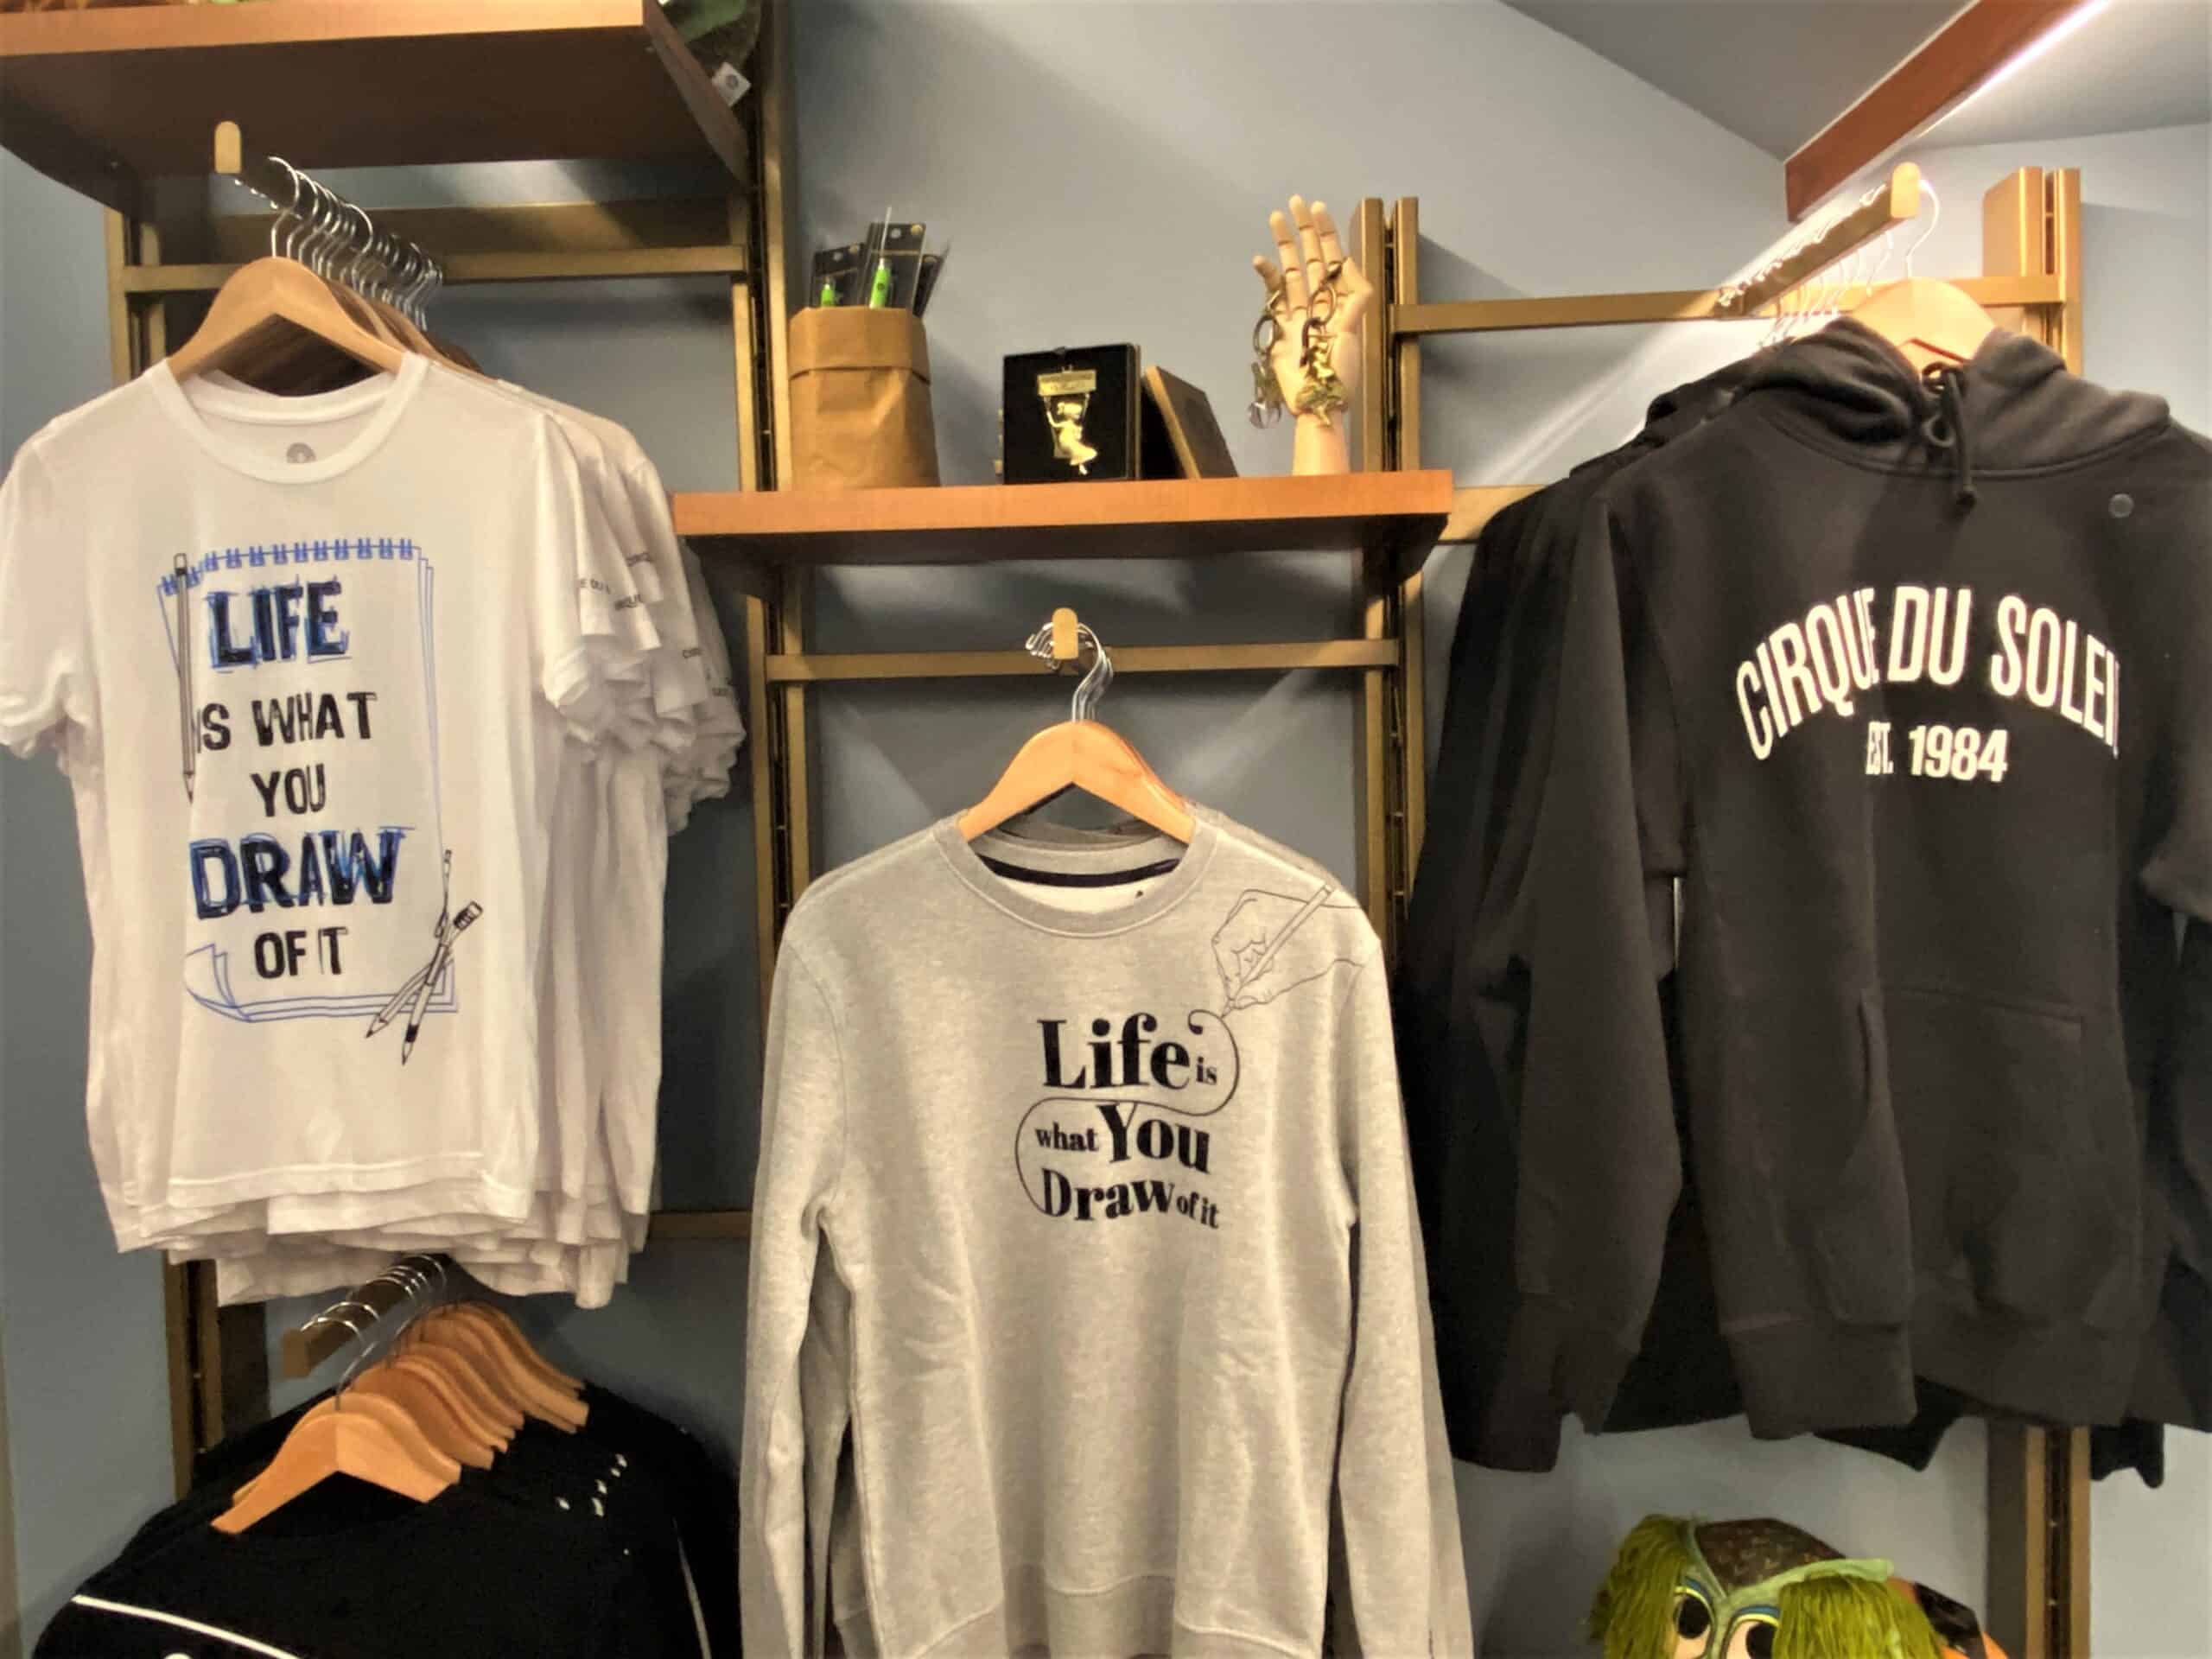 Cirque du Soleil Disney Springs Merchandise includes apparel with the slogan "Life is what you draw of it" printed on it, as well as merchandise that resemble animation tools like pencils and paper. 